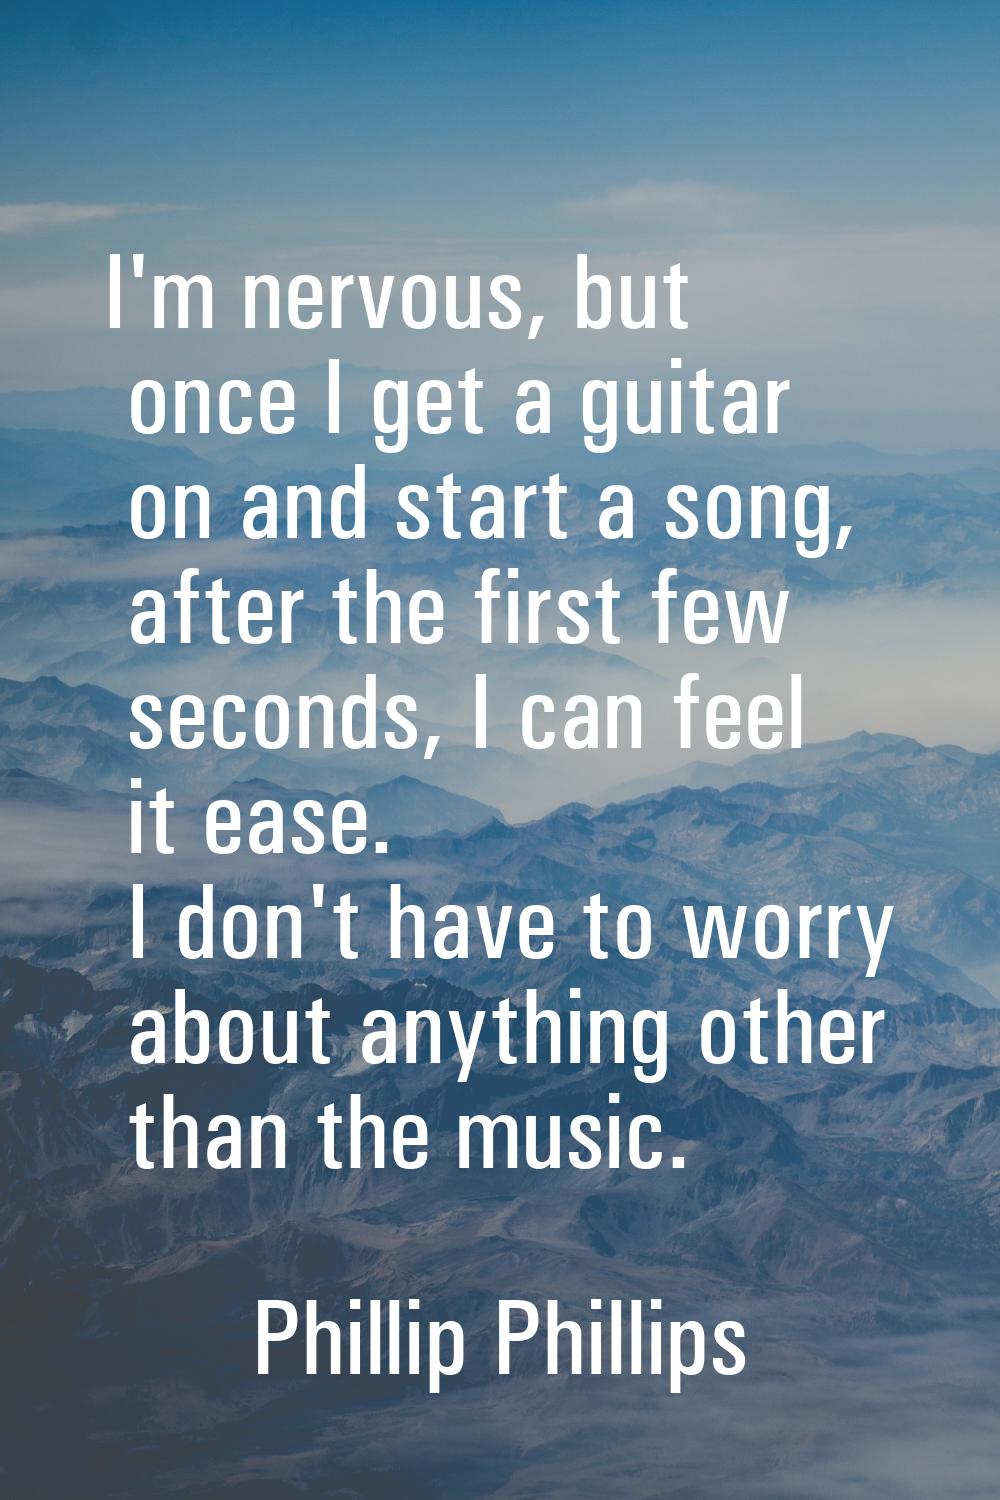 I'm nervous, but once I get a guitar on and start a song, after the first few seconds, I can feel i